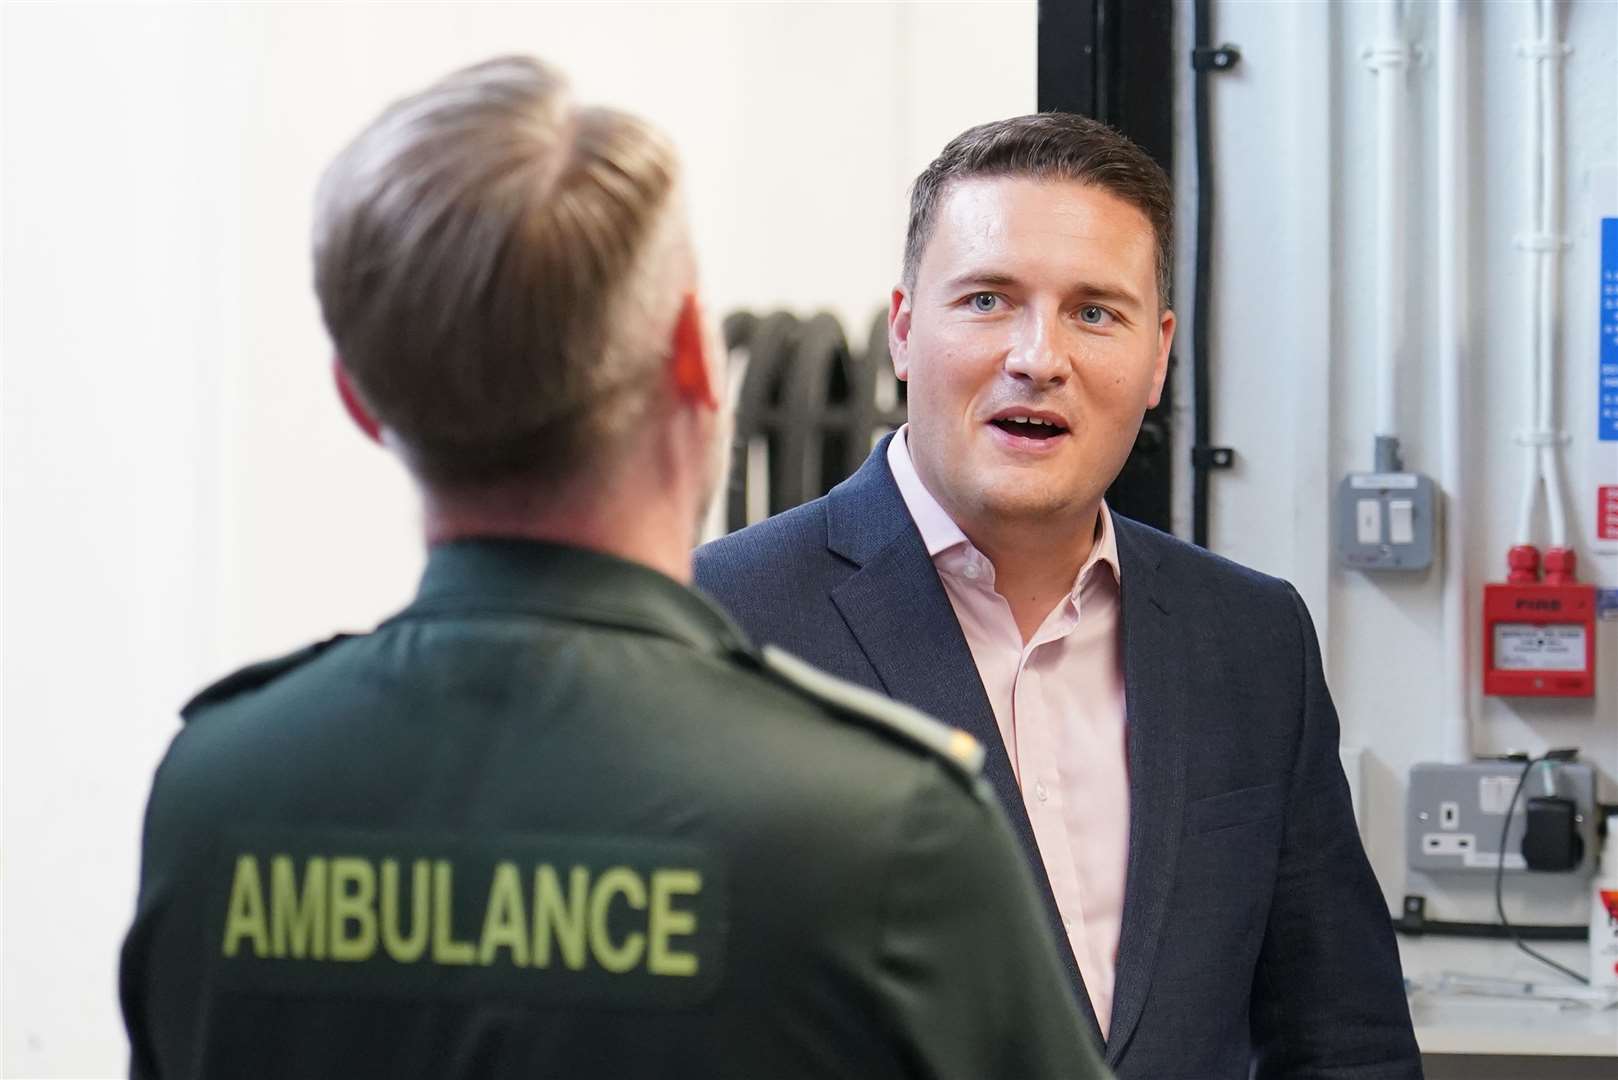 Wes Streeting said the Tories have caused the biggest strikes in NHS history (Dominic Lipinski/PA)